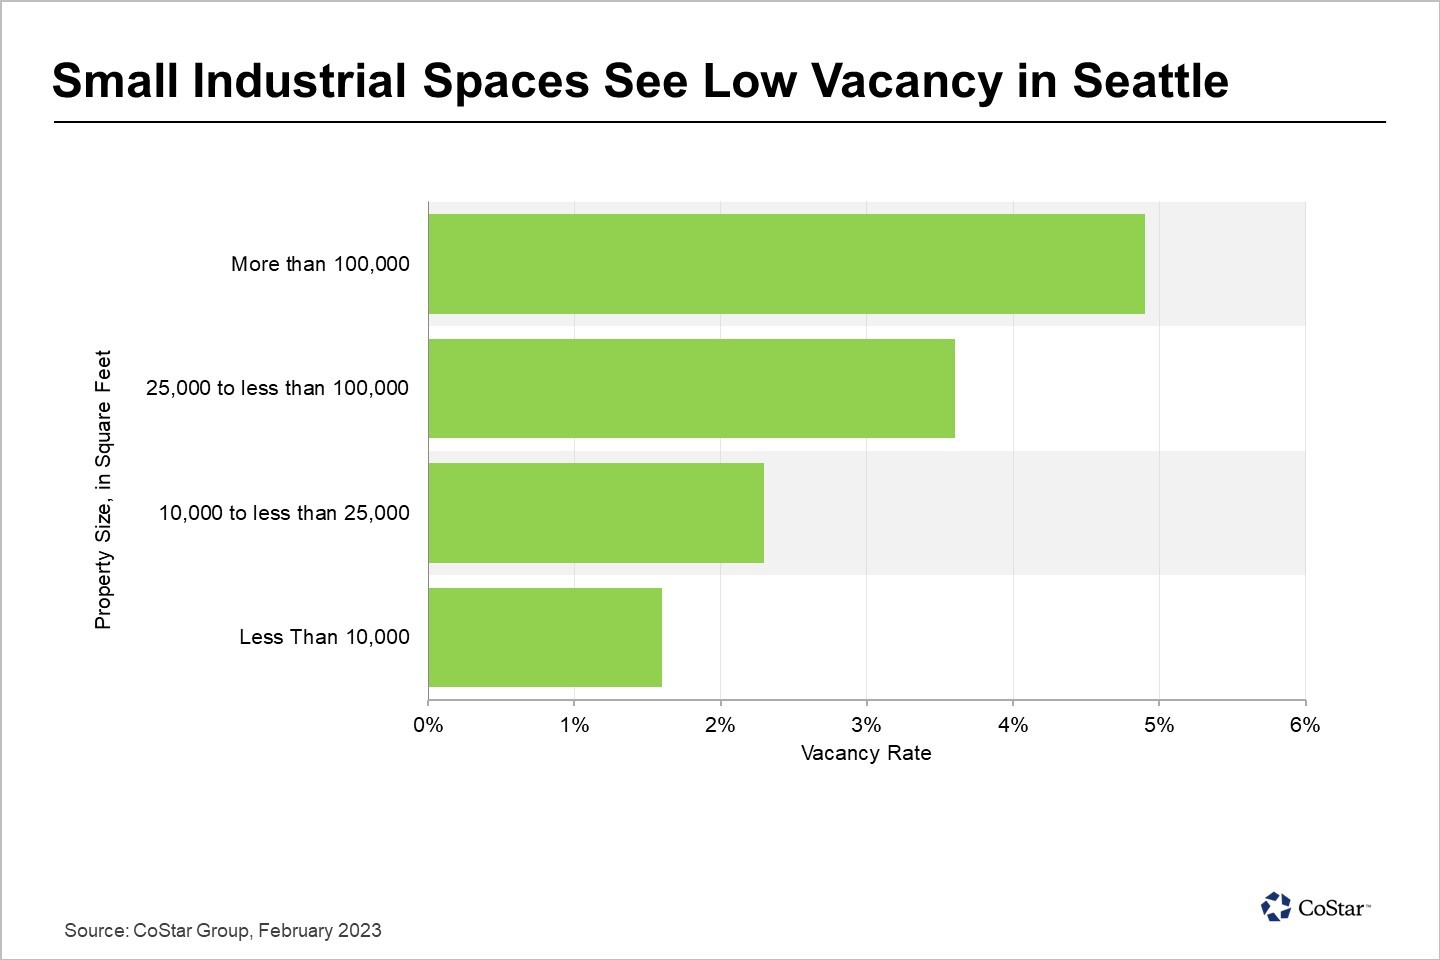 Scarcity Drives Low Availability in Seattle’s Small Industrial Spaces